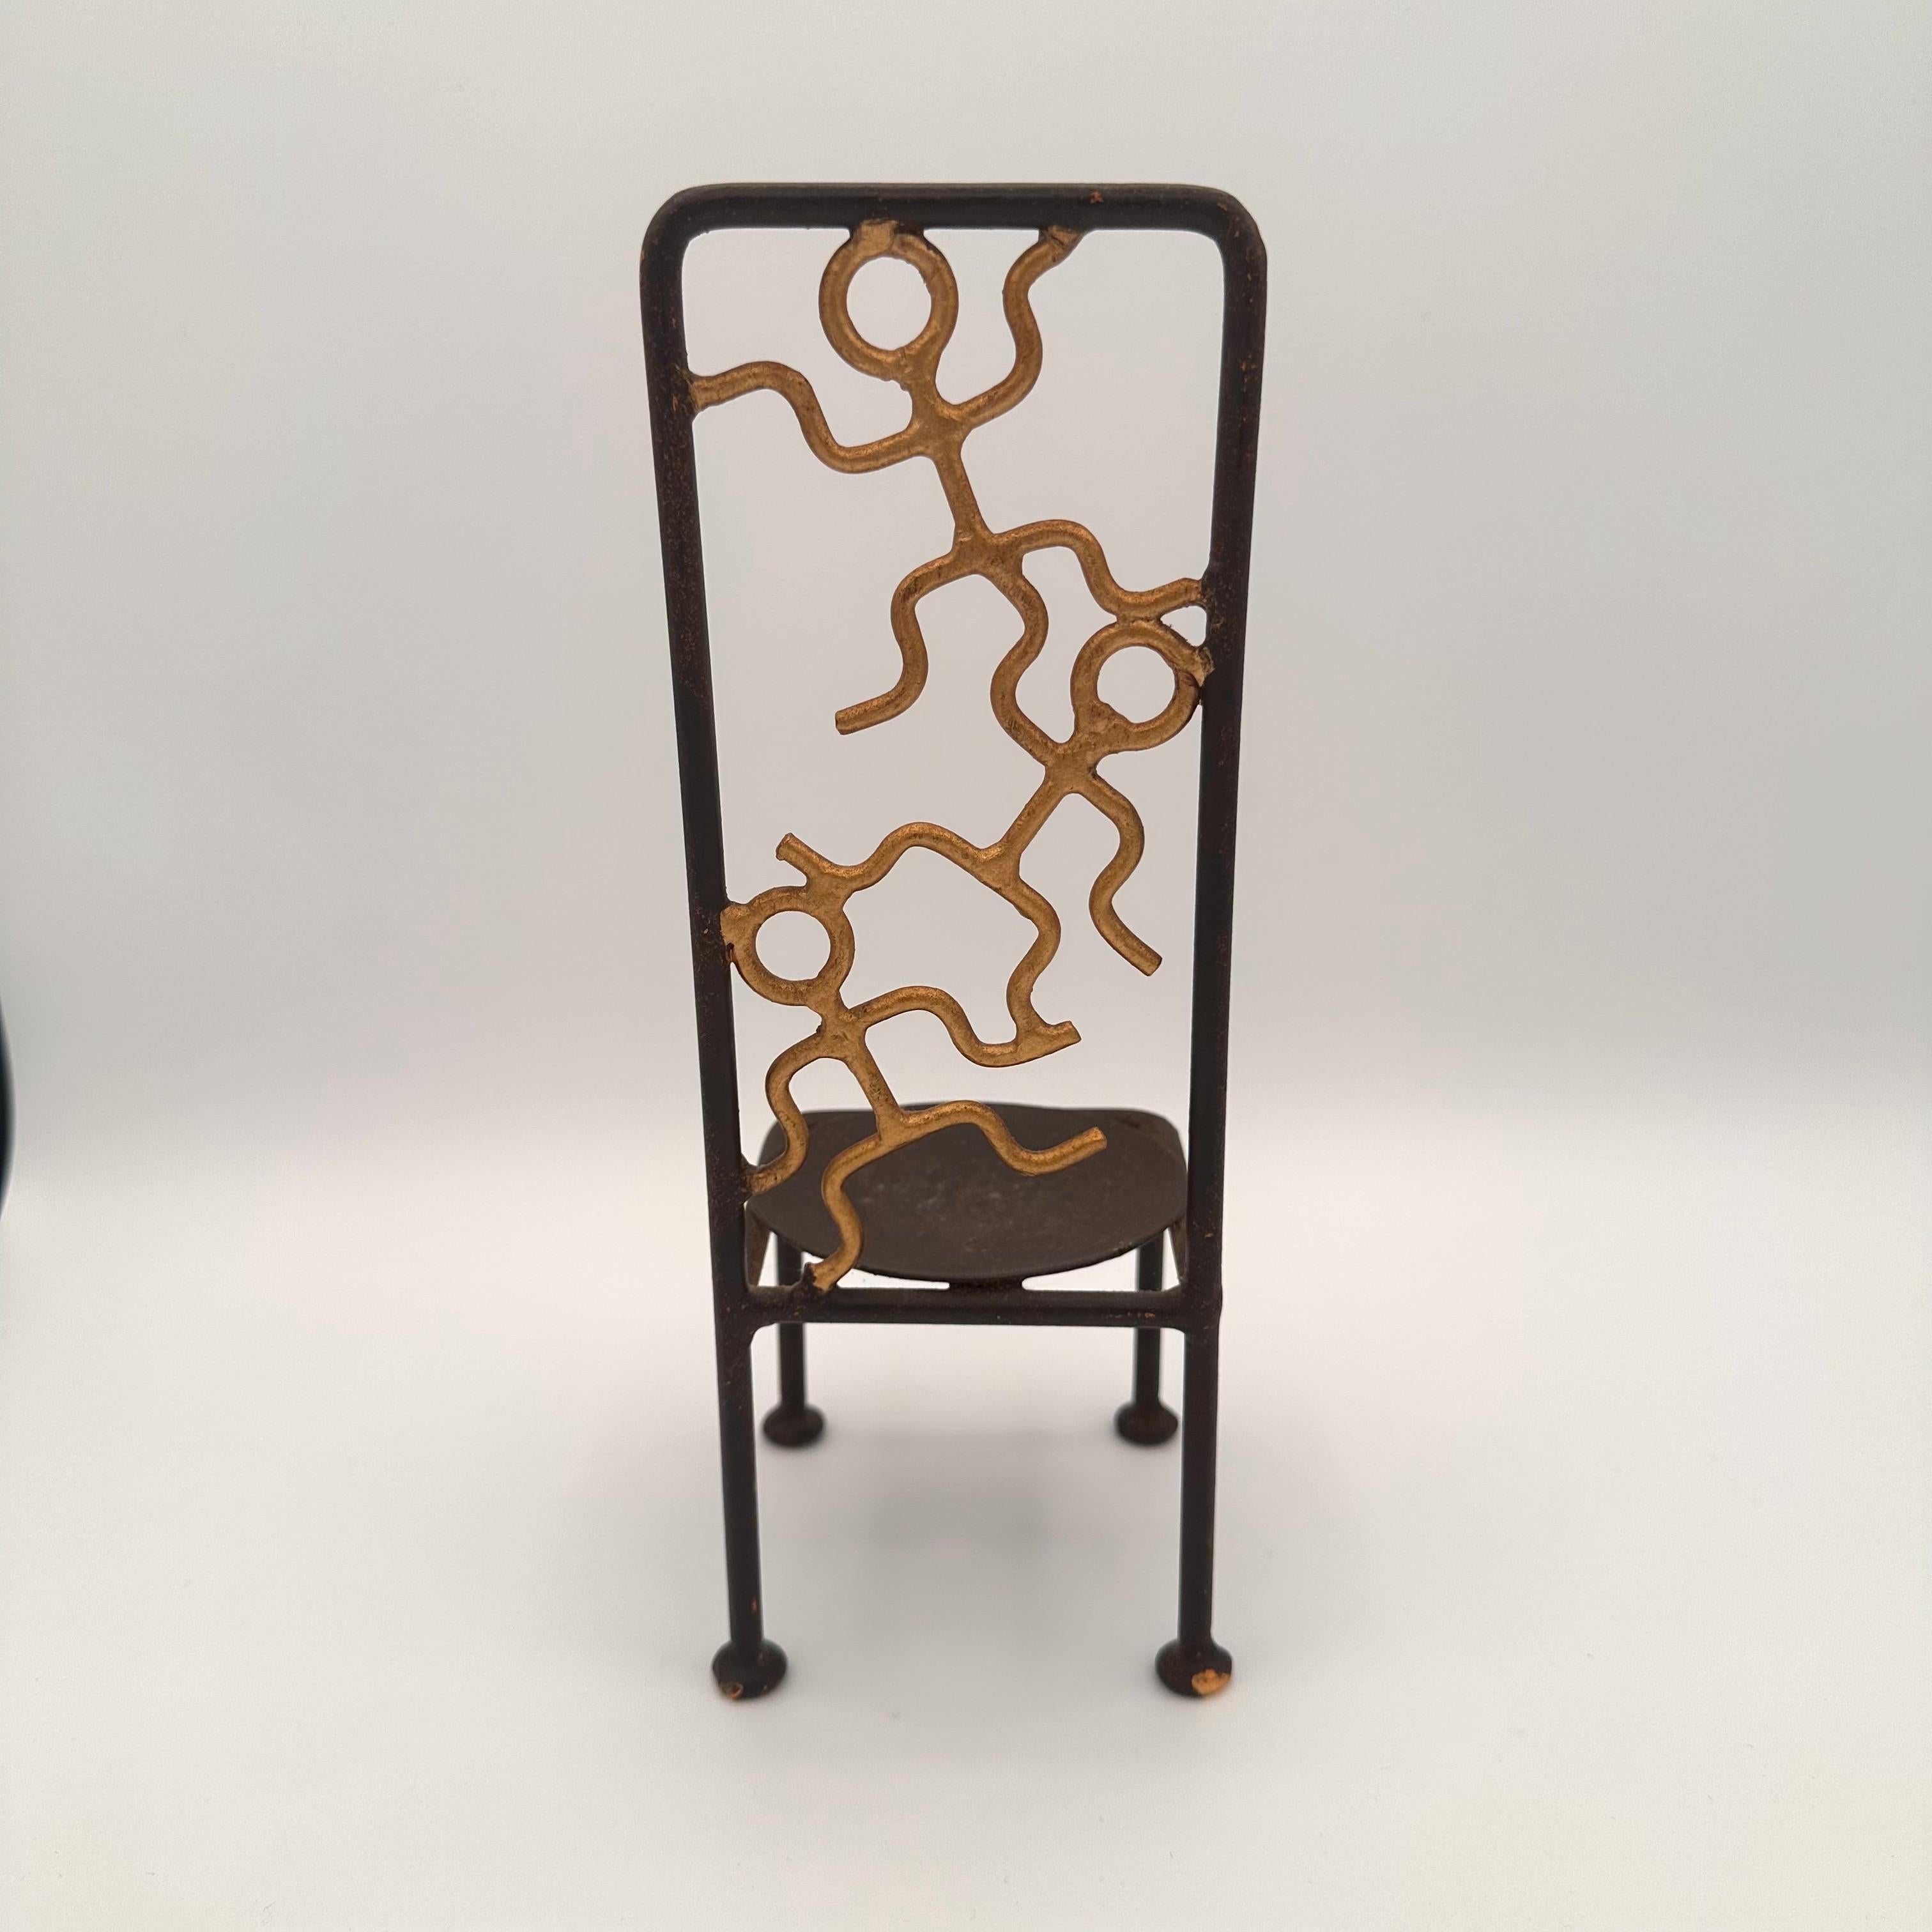 Vintage Handmade Miniature Metal Chair with Stick Figure Person Motif For Sale 4